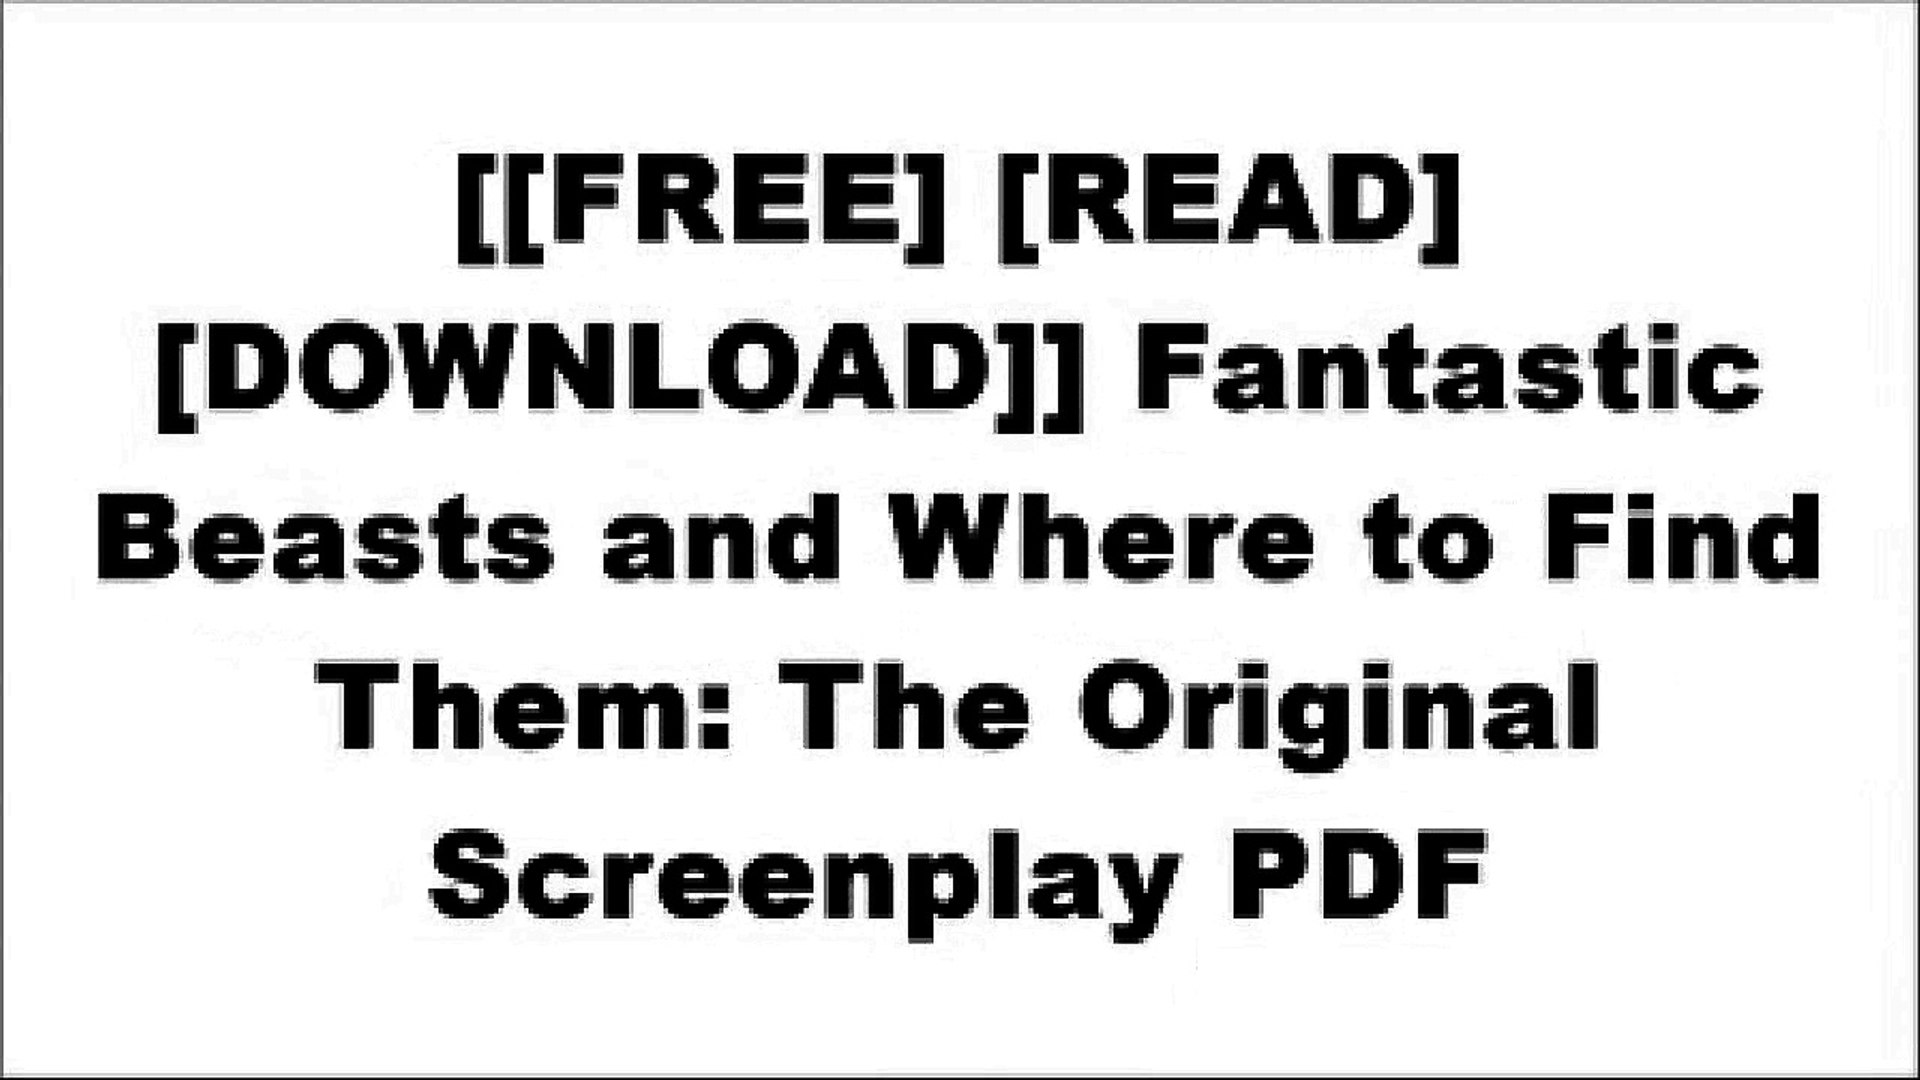 Fantastic beast and where to find them free download free